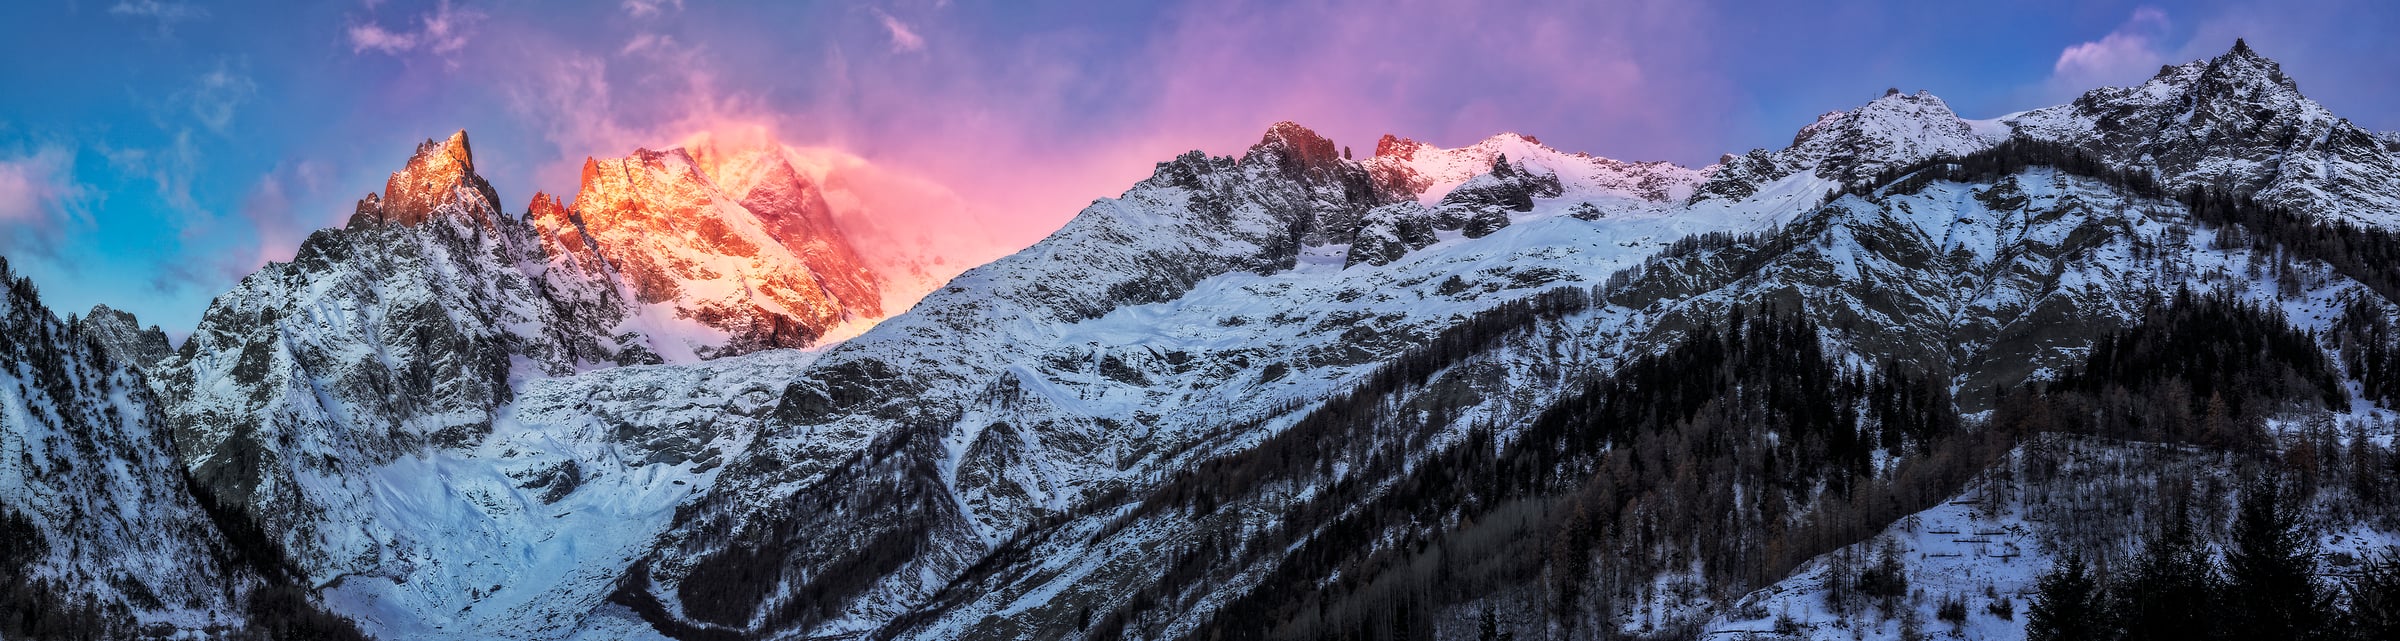 436 megapixels! A very high resolution, large-format VAST photo print of Mont Blanc at sunrise; panorama photograph created by Duilio Fiorille in Entrèves, Courmayeur, Italy.